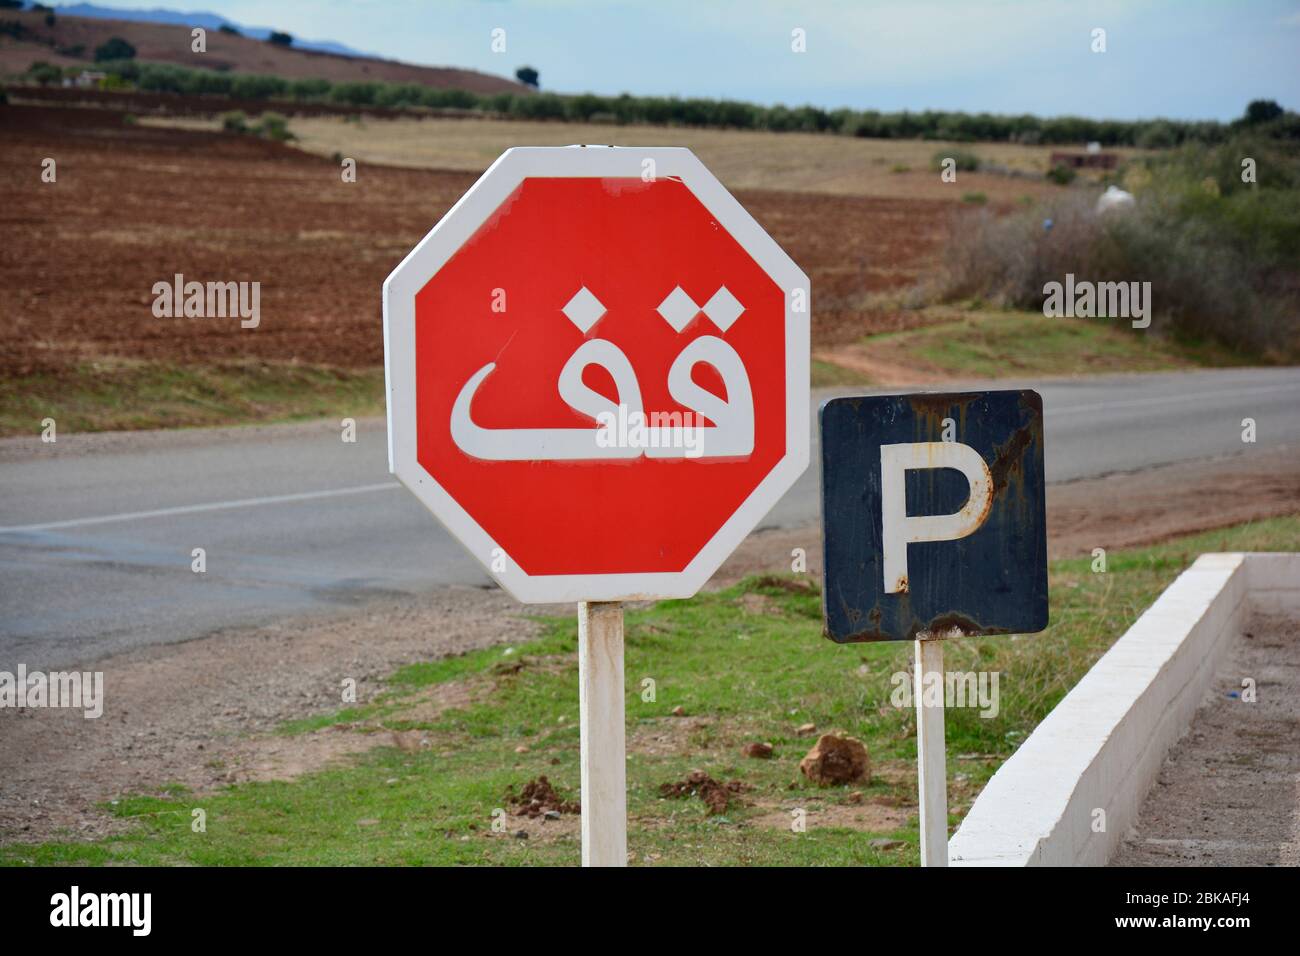 Morocco, traffic sign with arabic characters Stock Photo